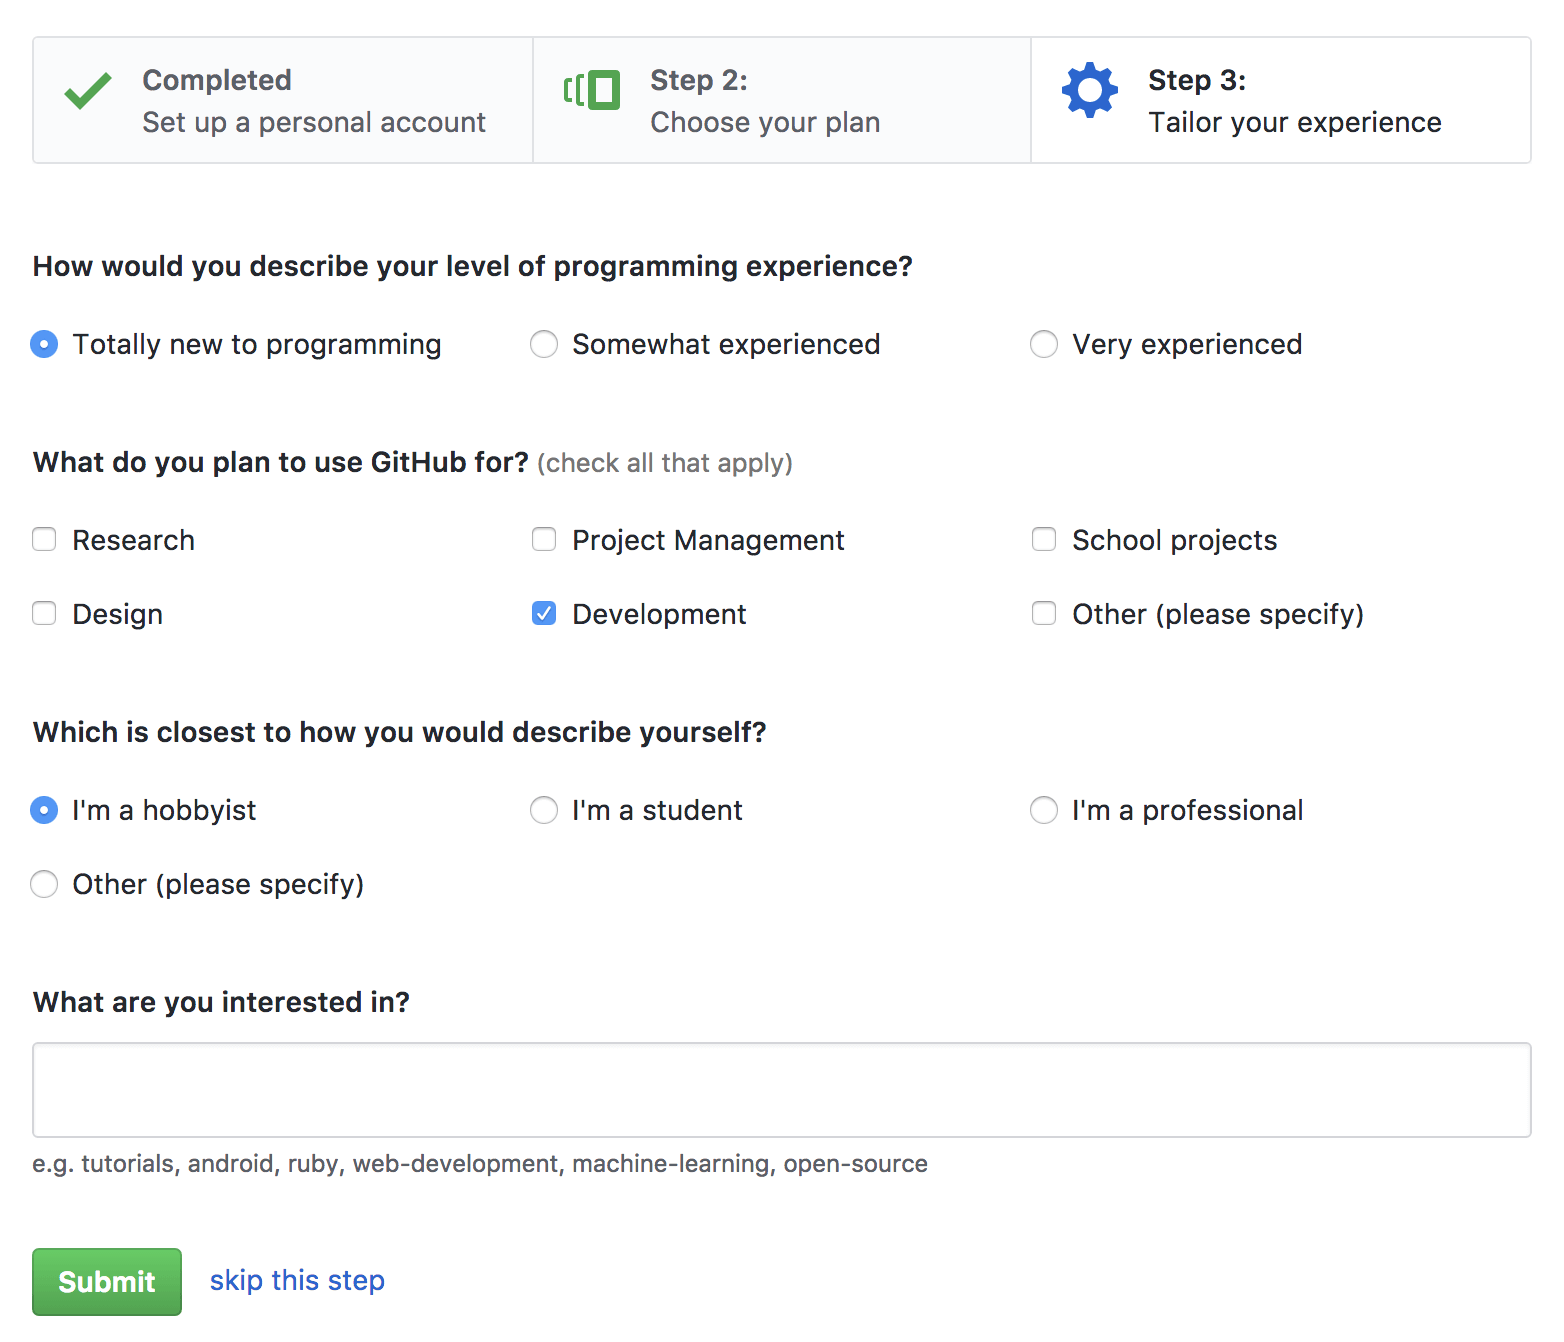 GitHub tailor your experience